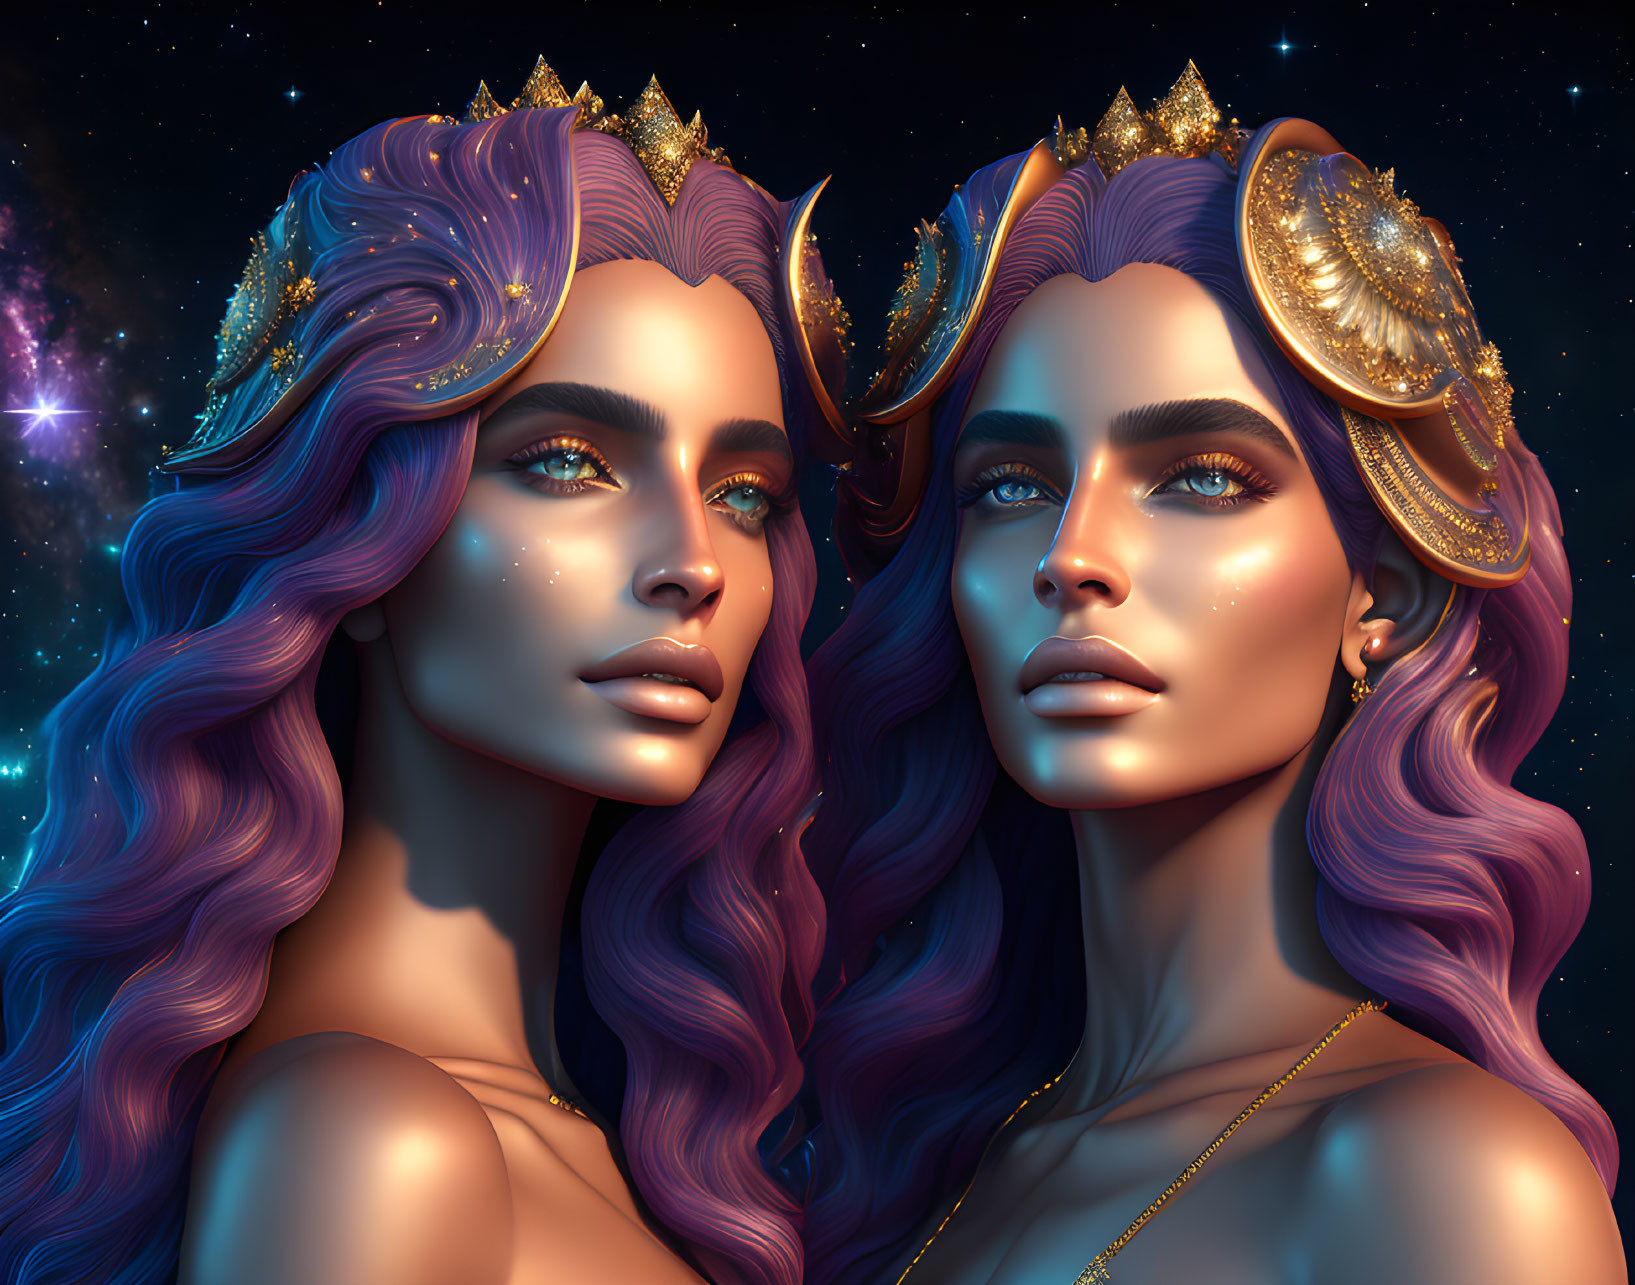 Symmetrical female figures with purple hair and golden crowns on cosmic backdrop